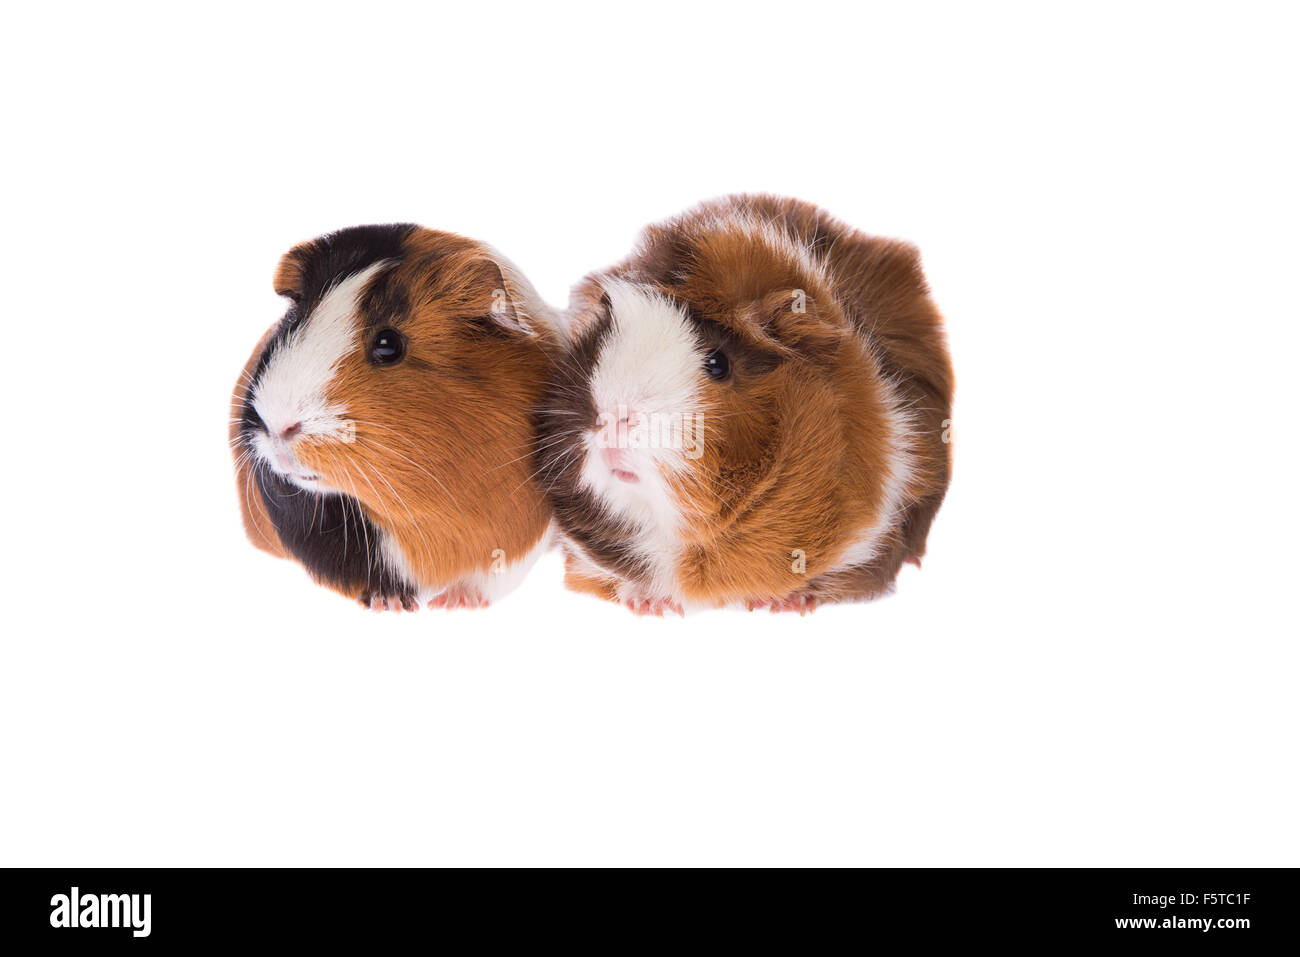 Guinea pigs looking to the left Stock Photo